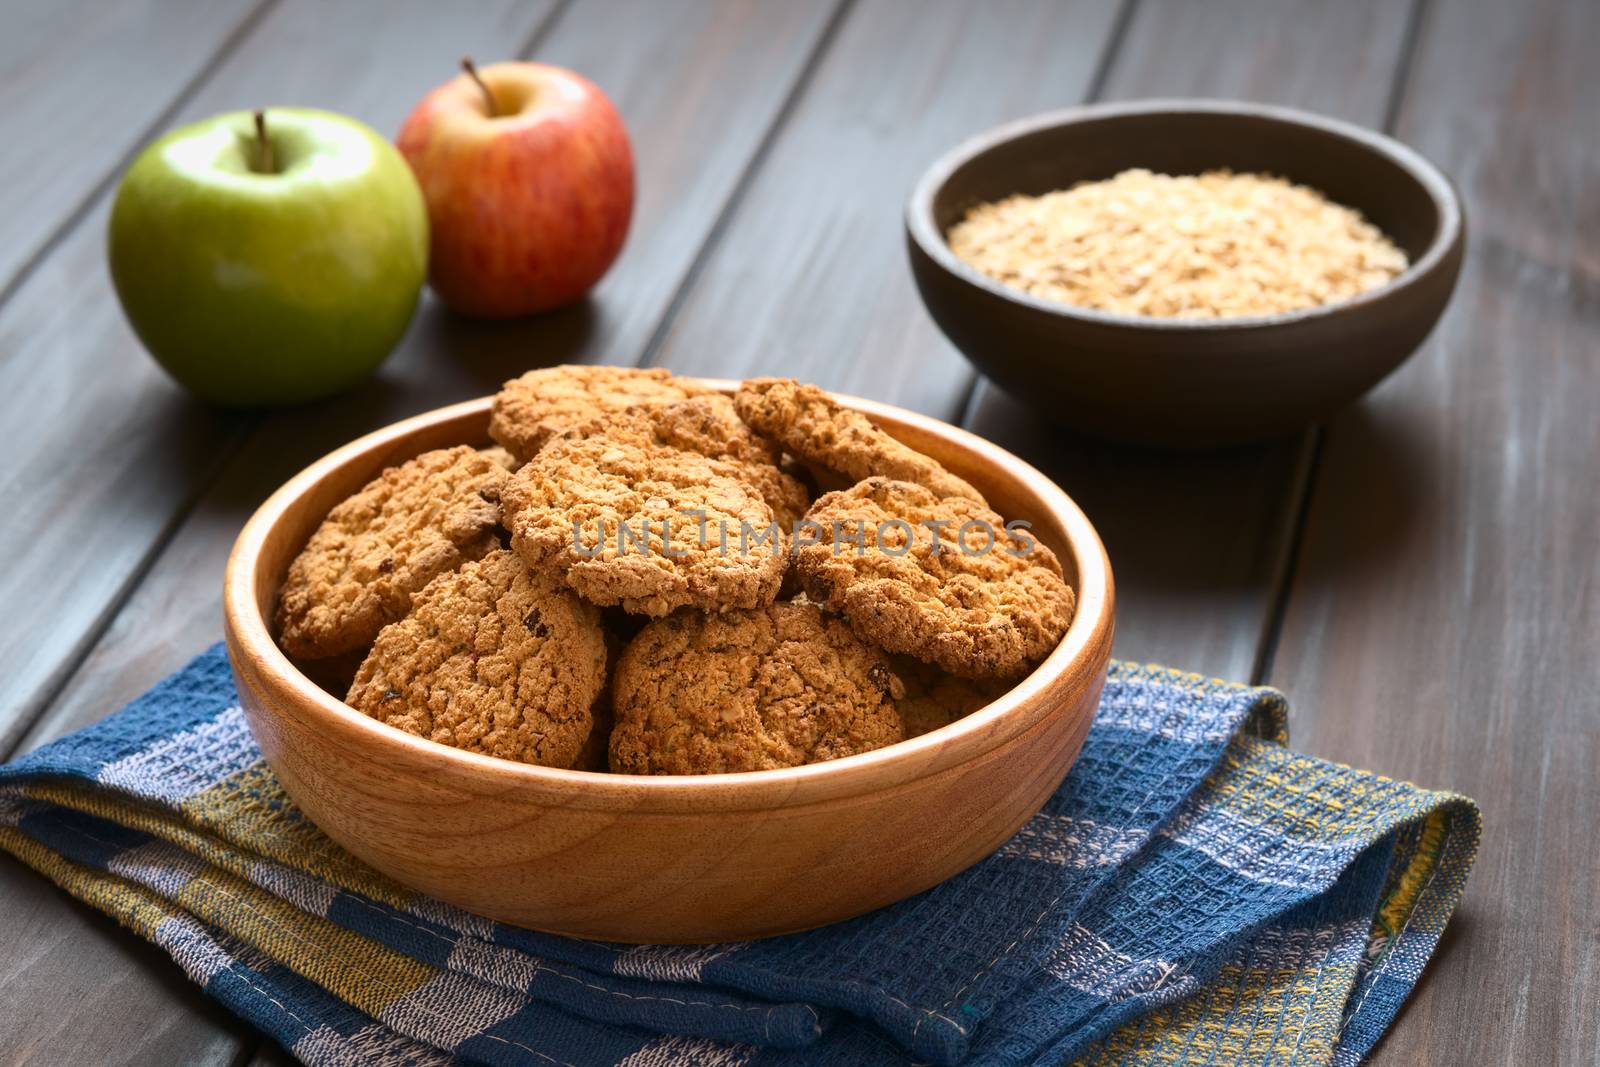 Oatmeal and Apple Cookies by ildi